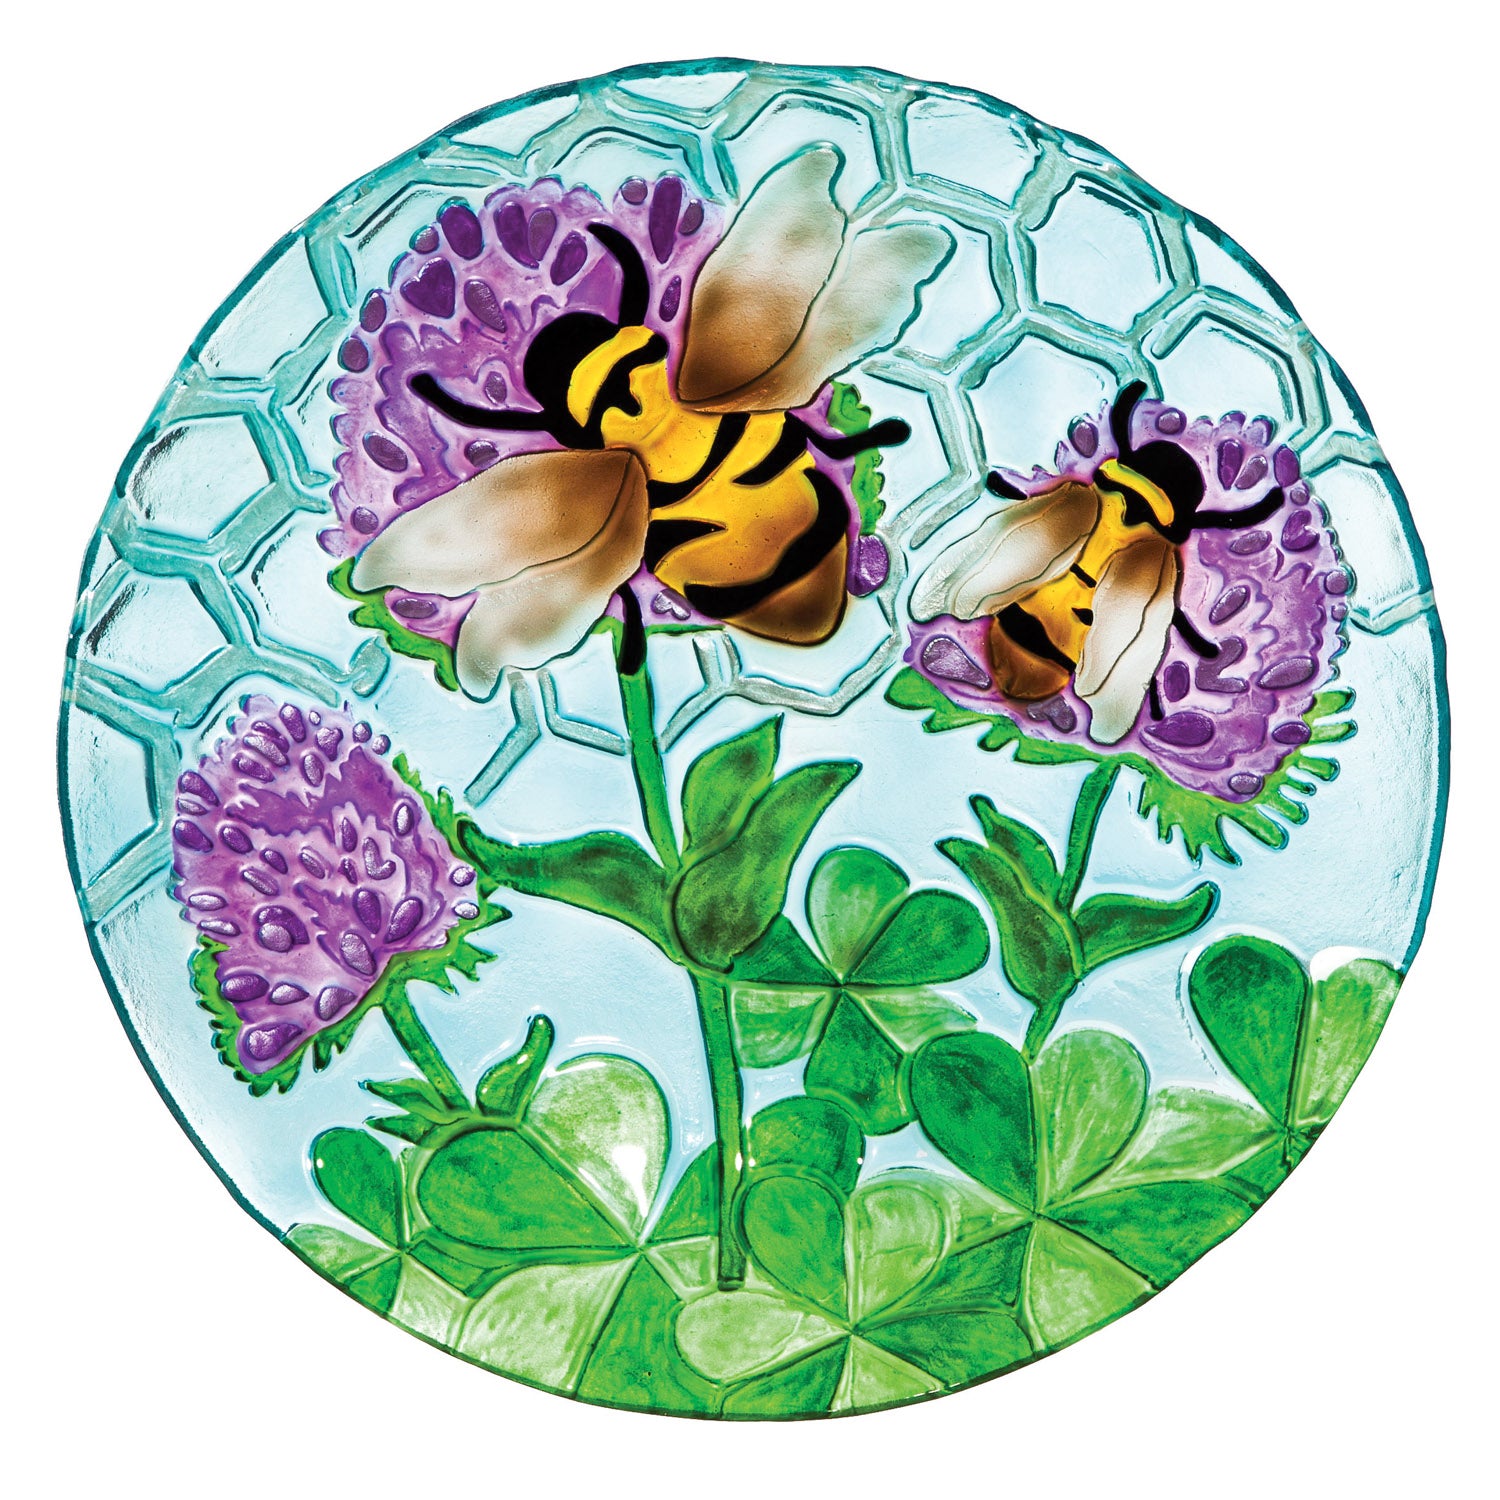 Charming 18" Hand-Painted Glass Bird Bath - Vibrant Bee and Flower Design for Indoor or Outdoor Use